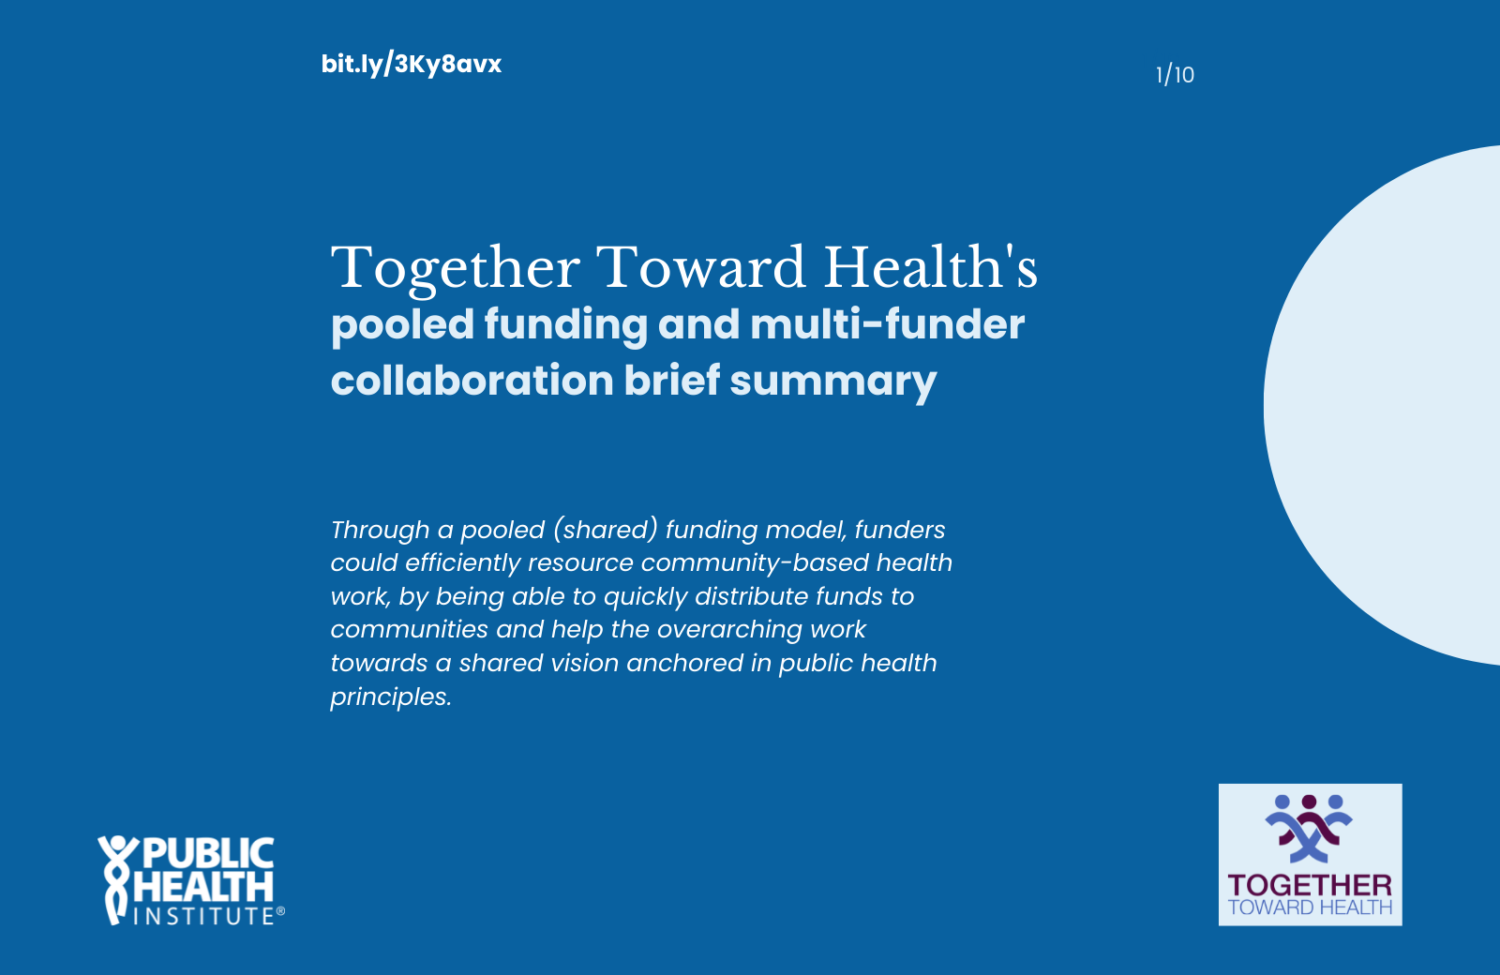 Through a pooled (shared) funding model, funders could efficiently resource community-based health work, by being able to quickly distribute funds to communities and help the overarching work towards a shared vision anchored in public health principles.